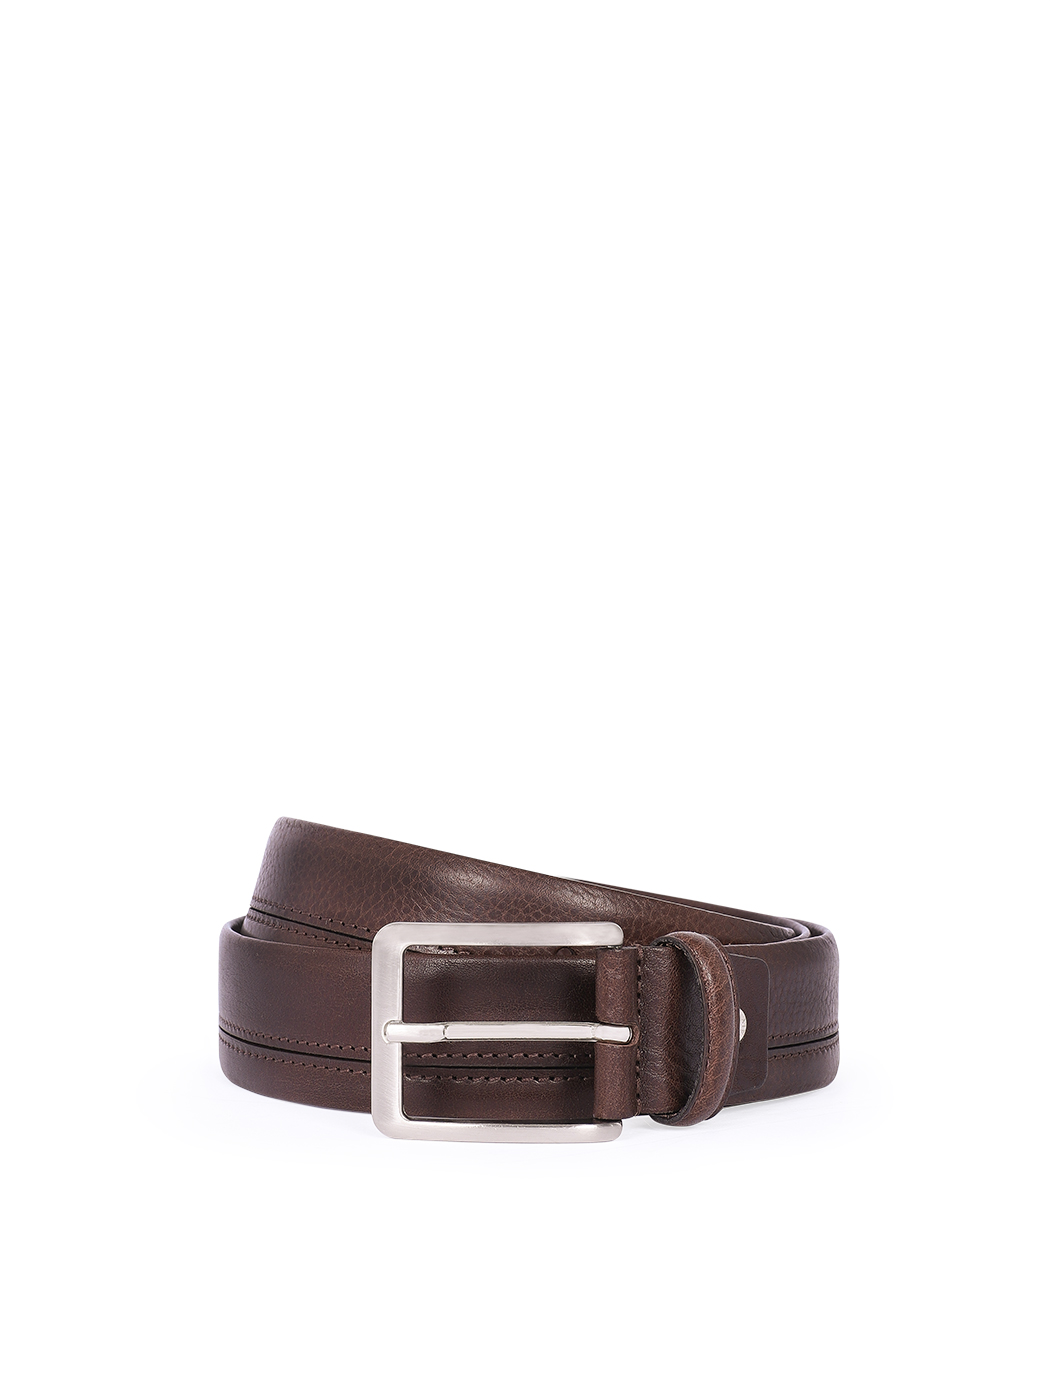 Classic brown leather belt with stitching